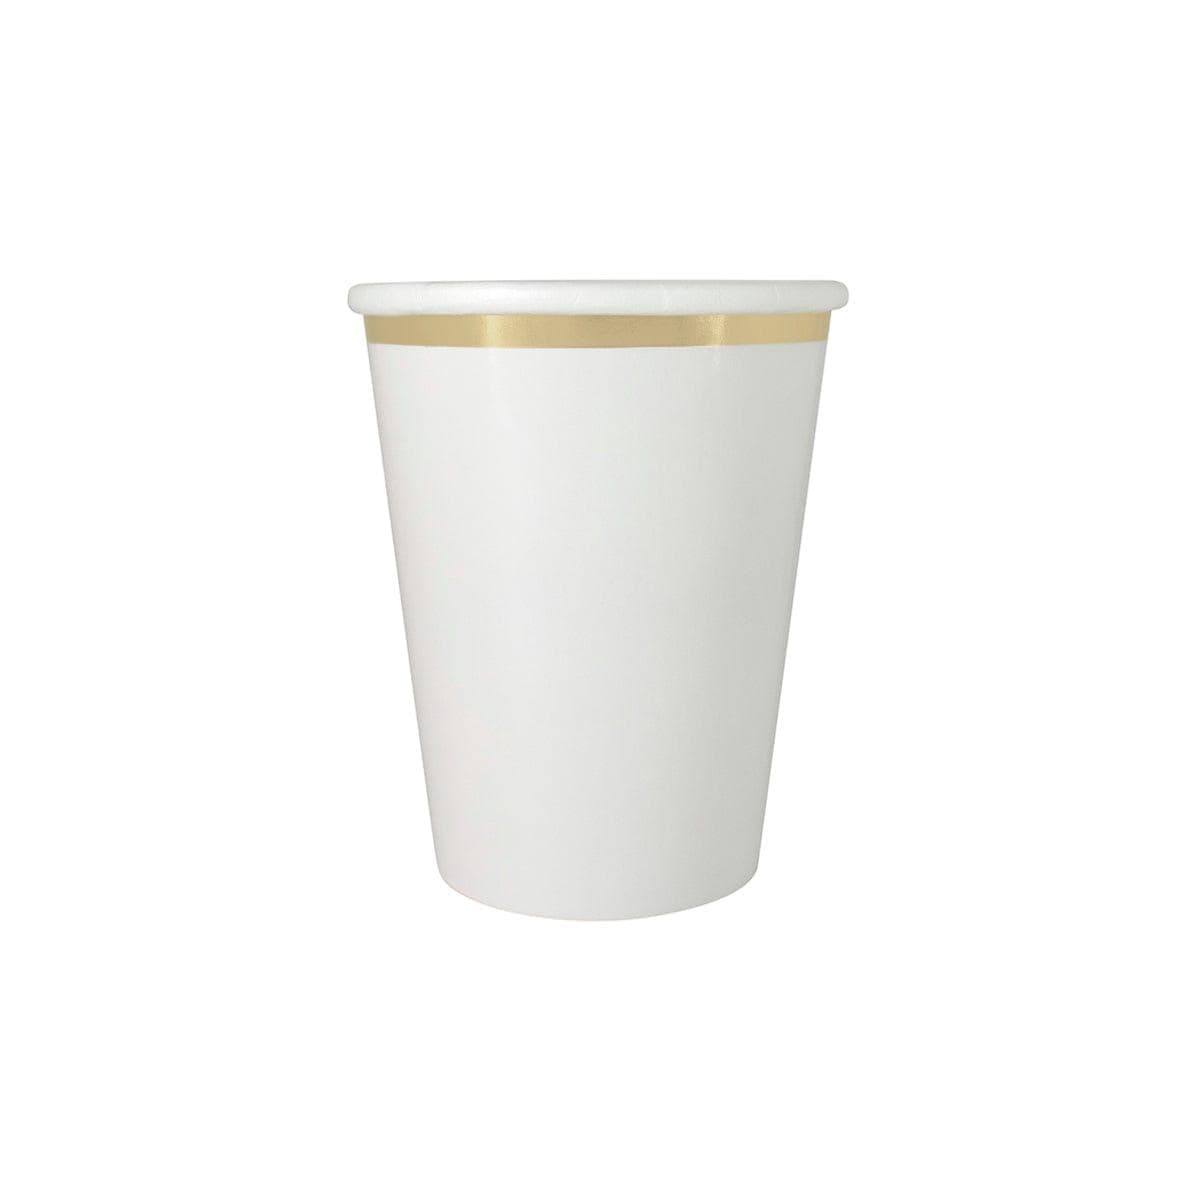 YIWU SANDY PAPER PRODUCTS CO., LTD Everyday Entertaining Cups White, 9 Oz, 8 Count